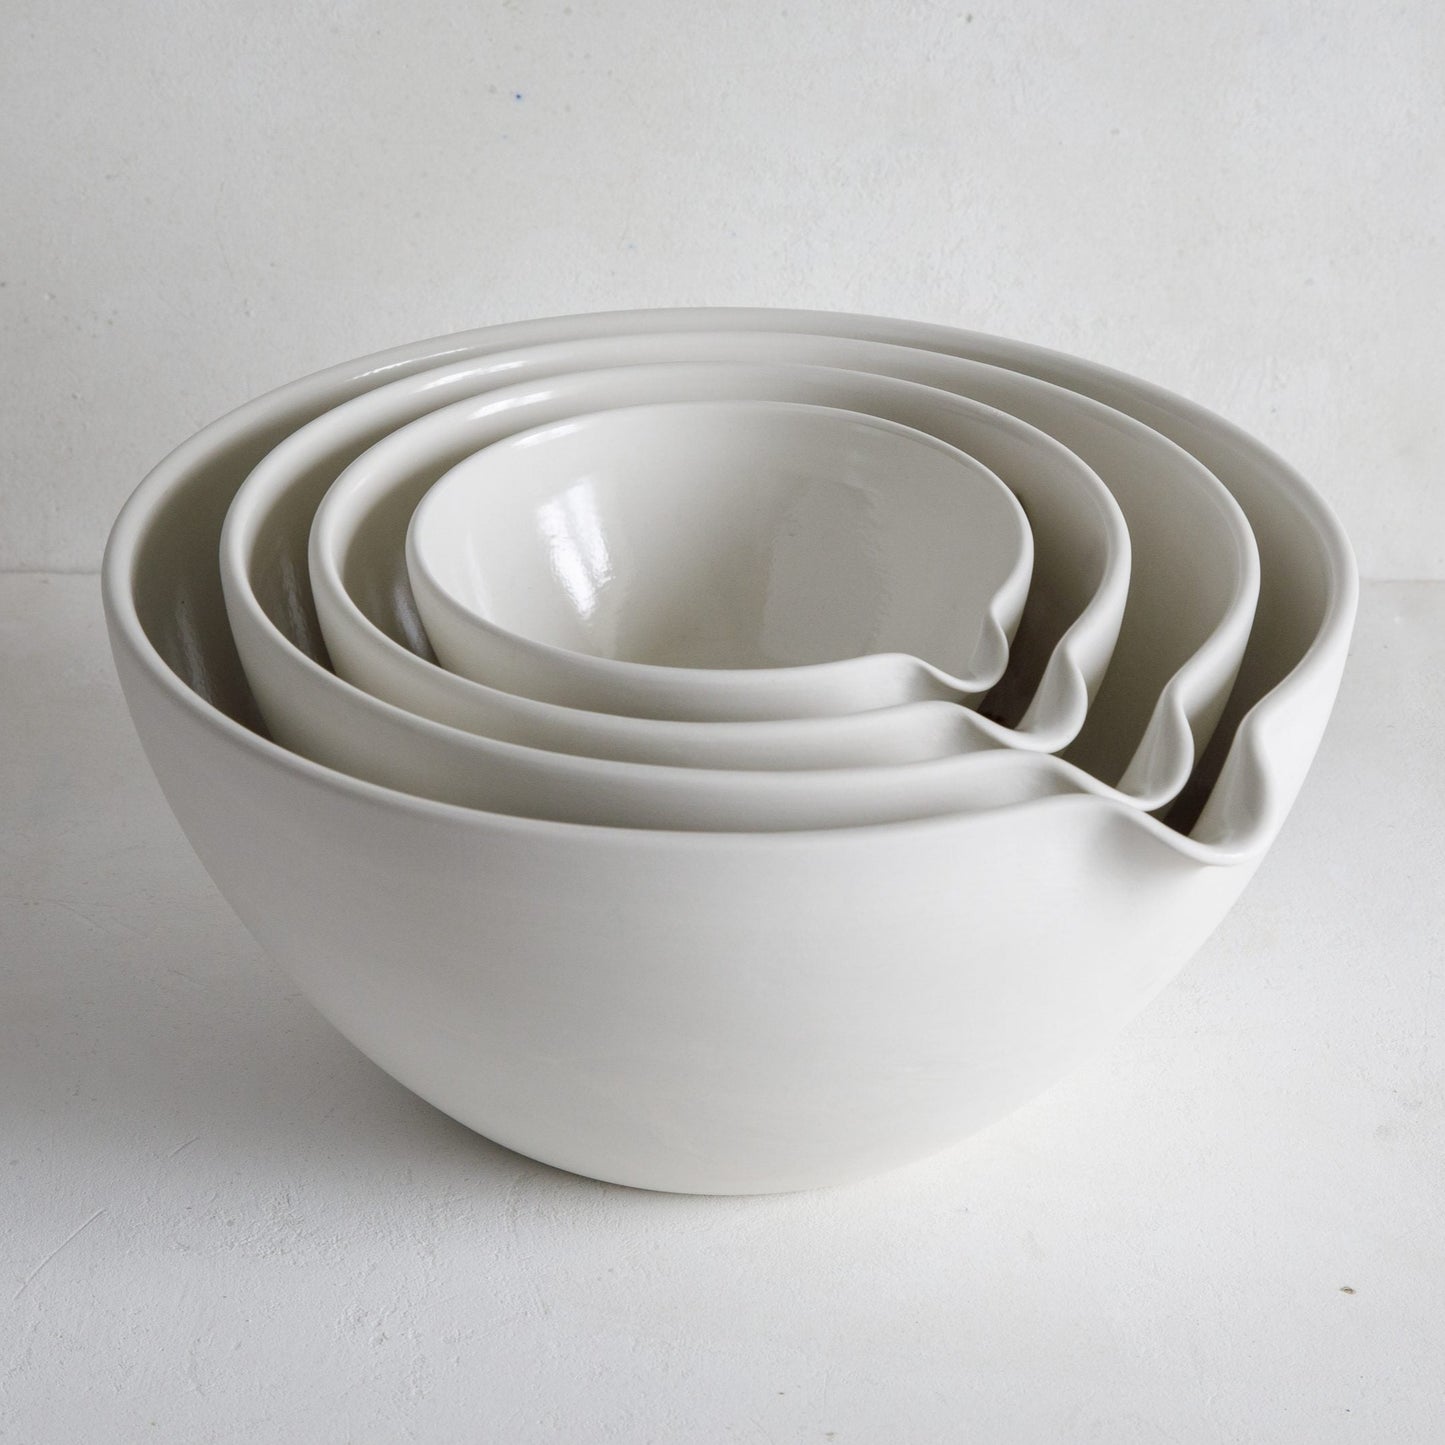 Mixing Bowls with pouring spout